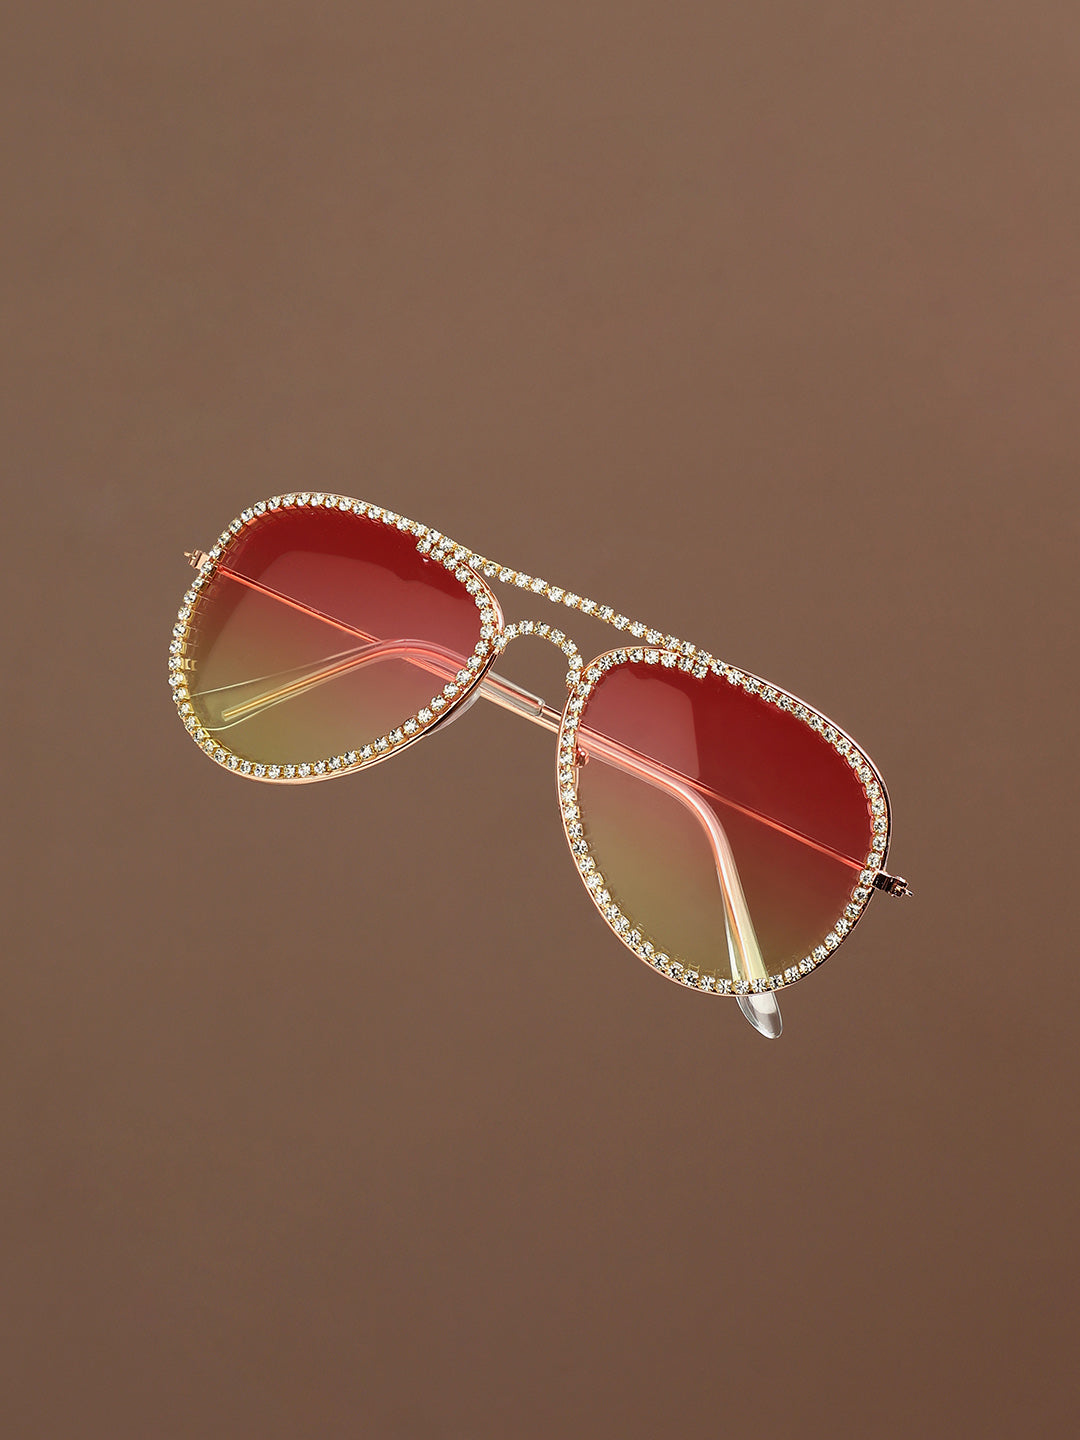 Glamourous Gems: Bedazzle Your Shades